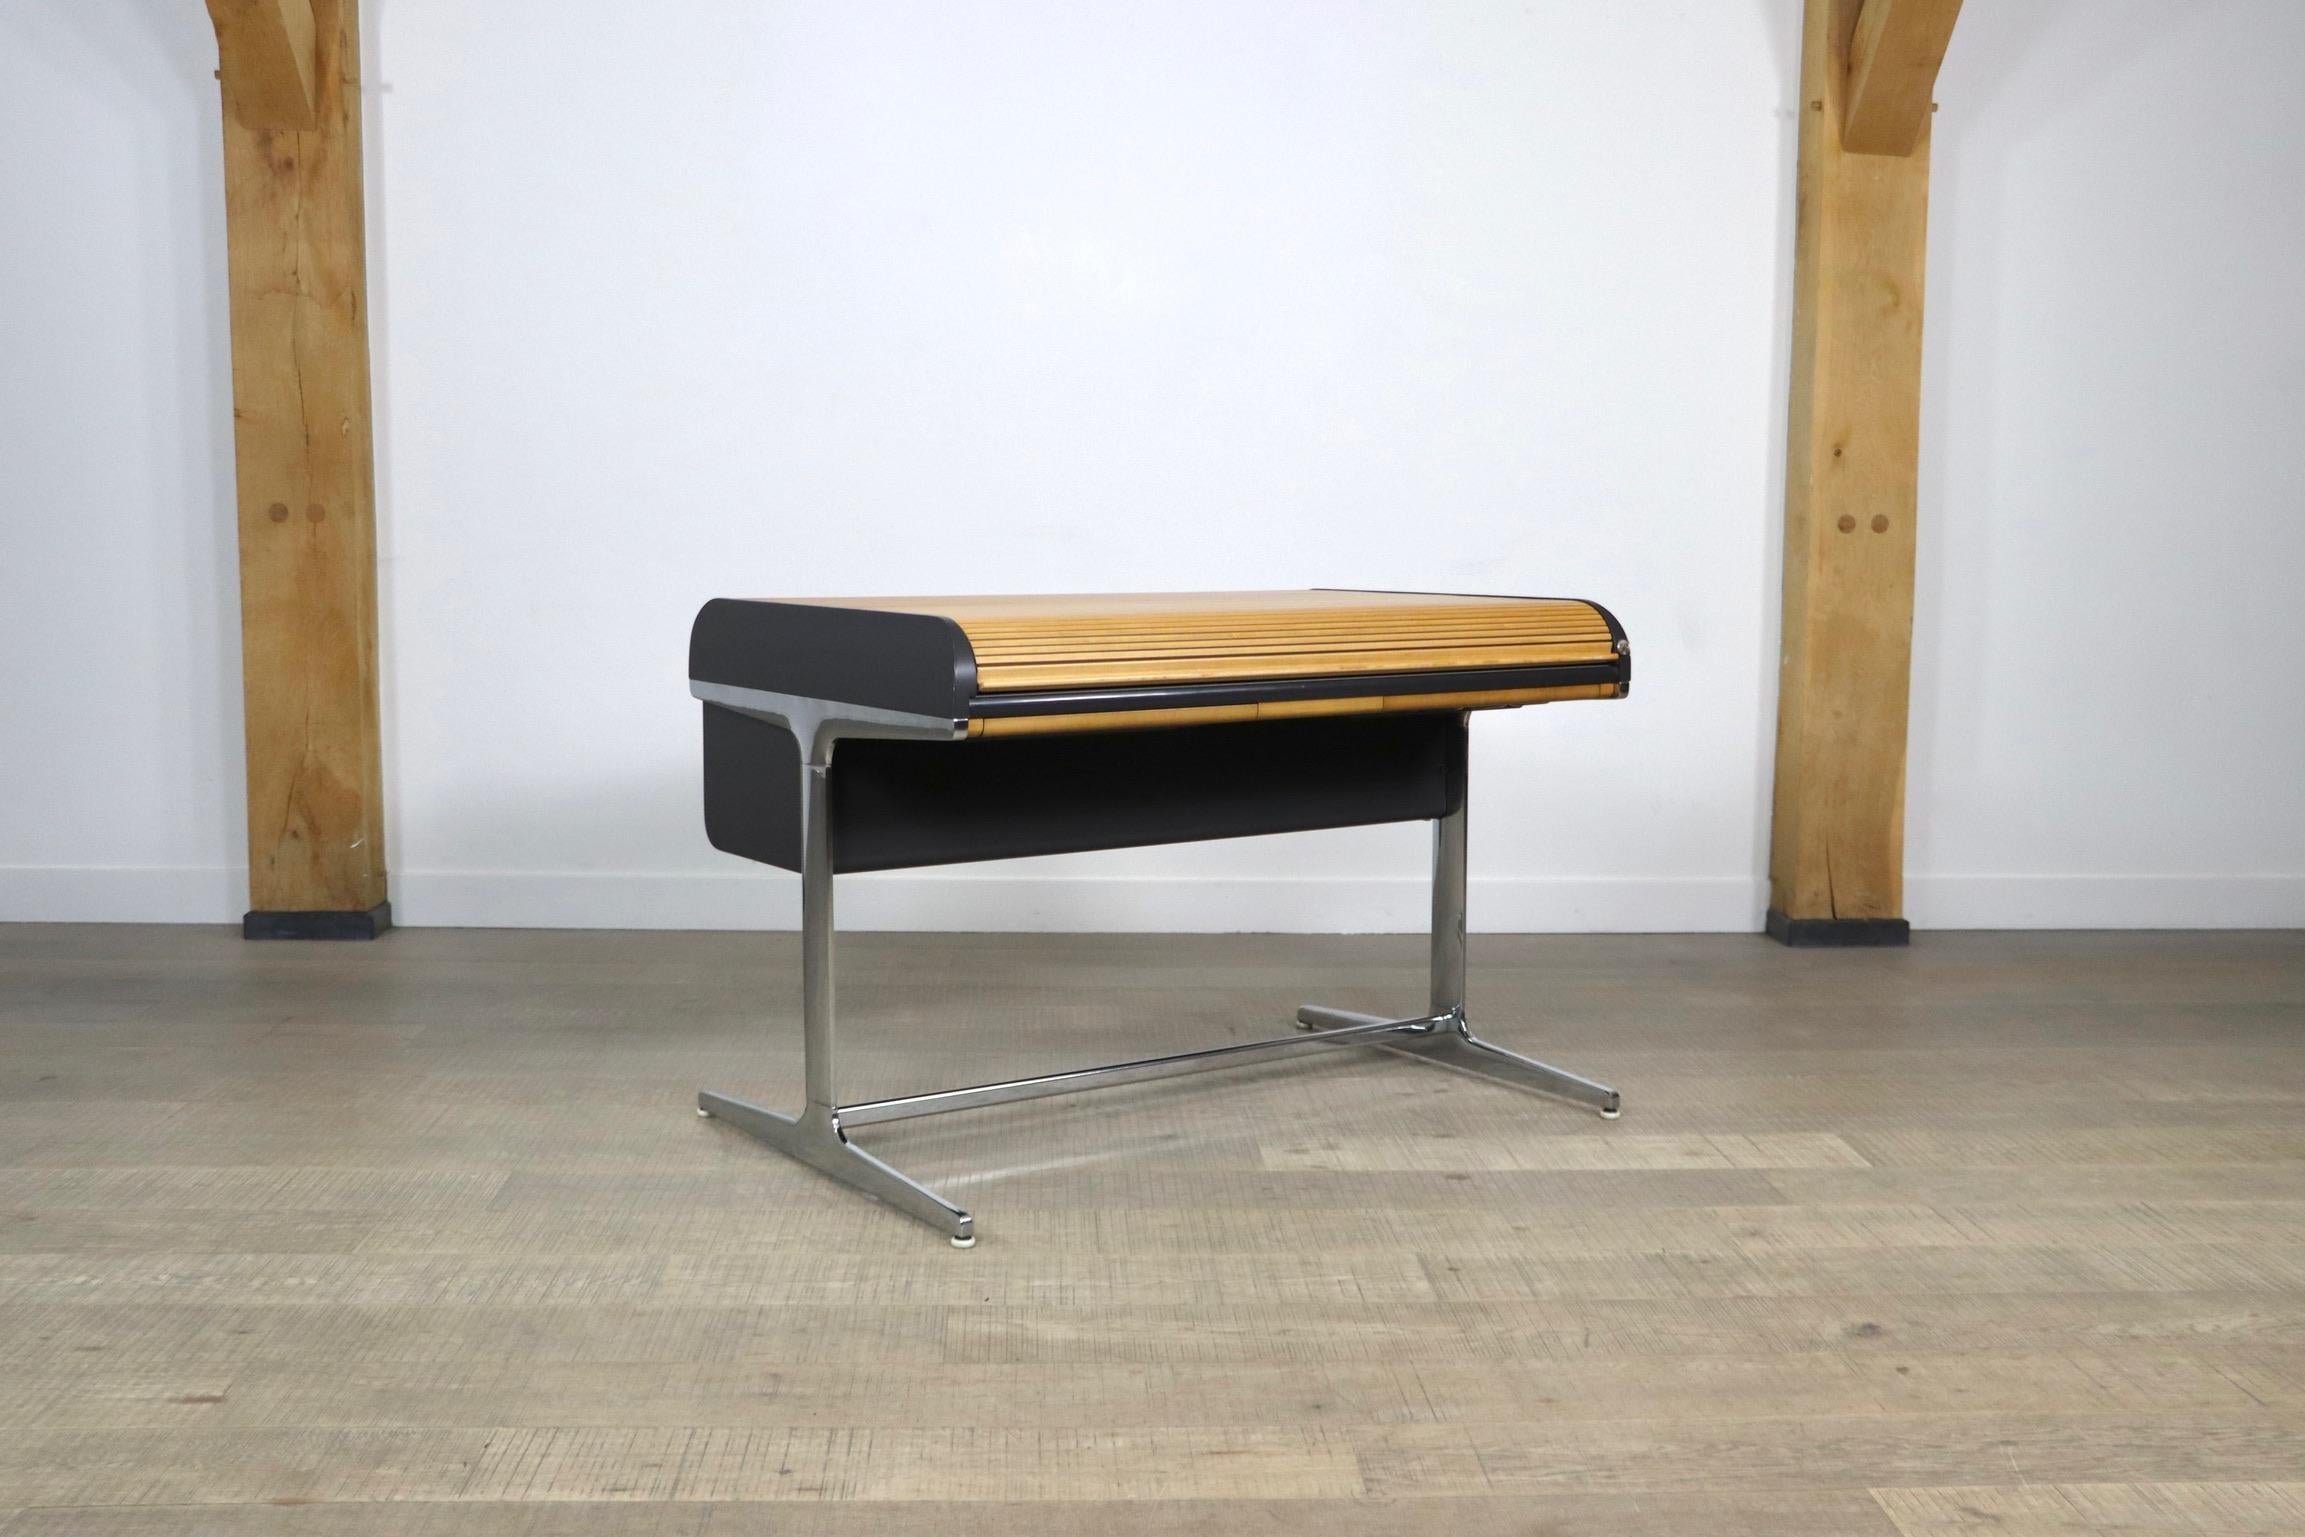 Incredible Action office (Ao1) desk designed by Georde Nelson and Robert Propst which was produced by Herman Miller from 1964 to 1968. 
Action Office was the world’s first open-plan office system and resulted from more than three years of research